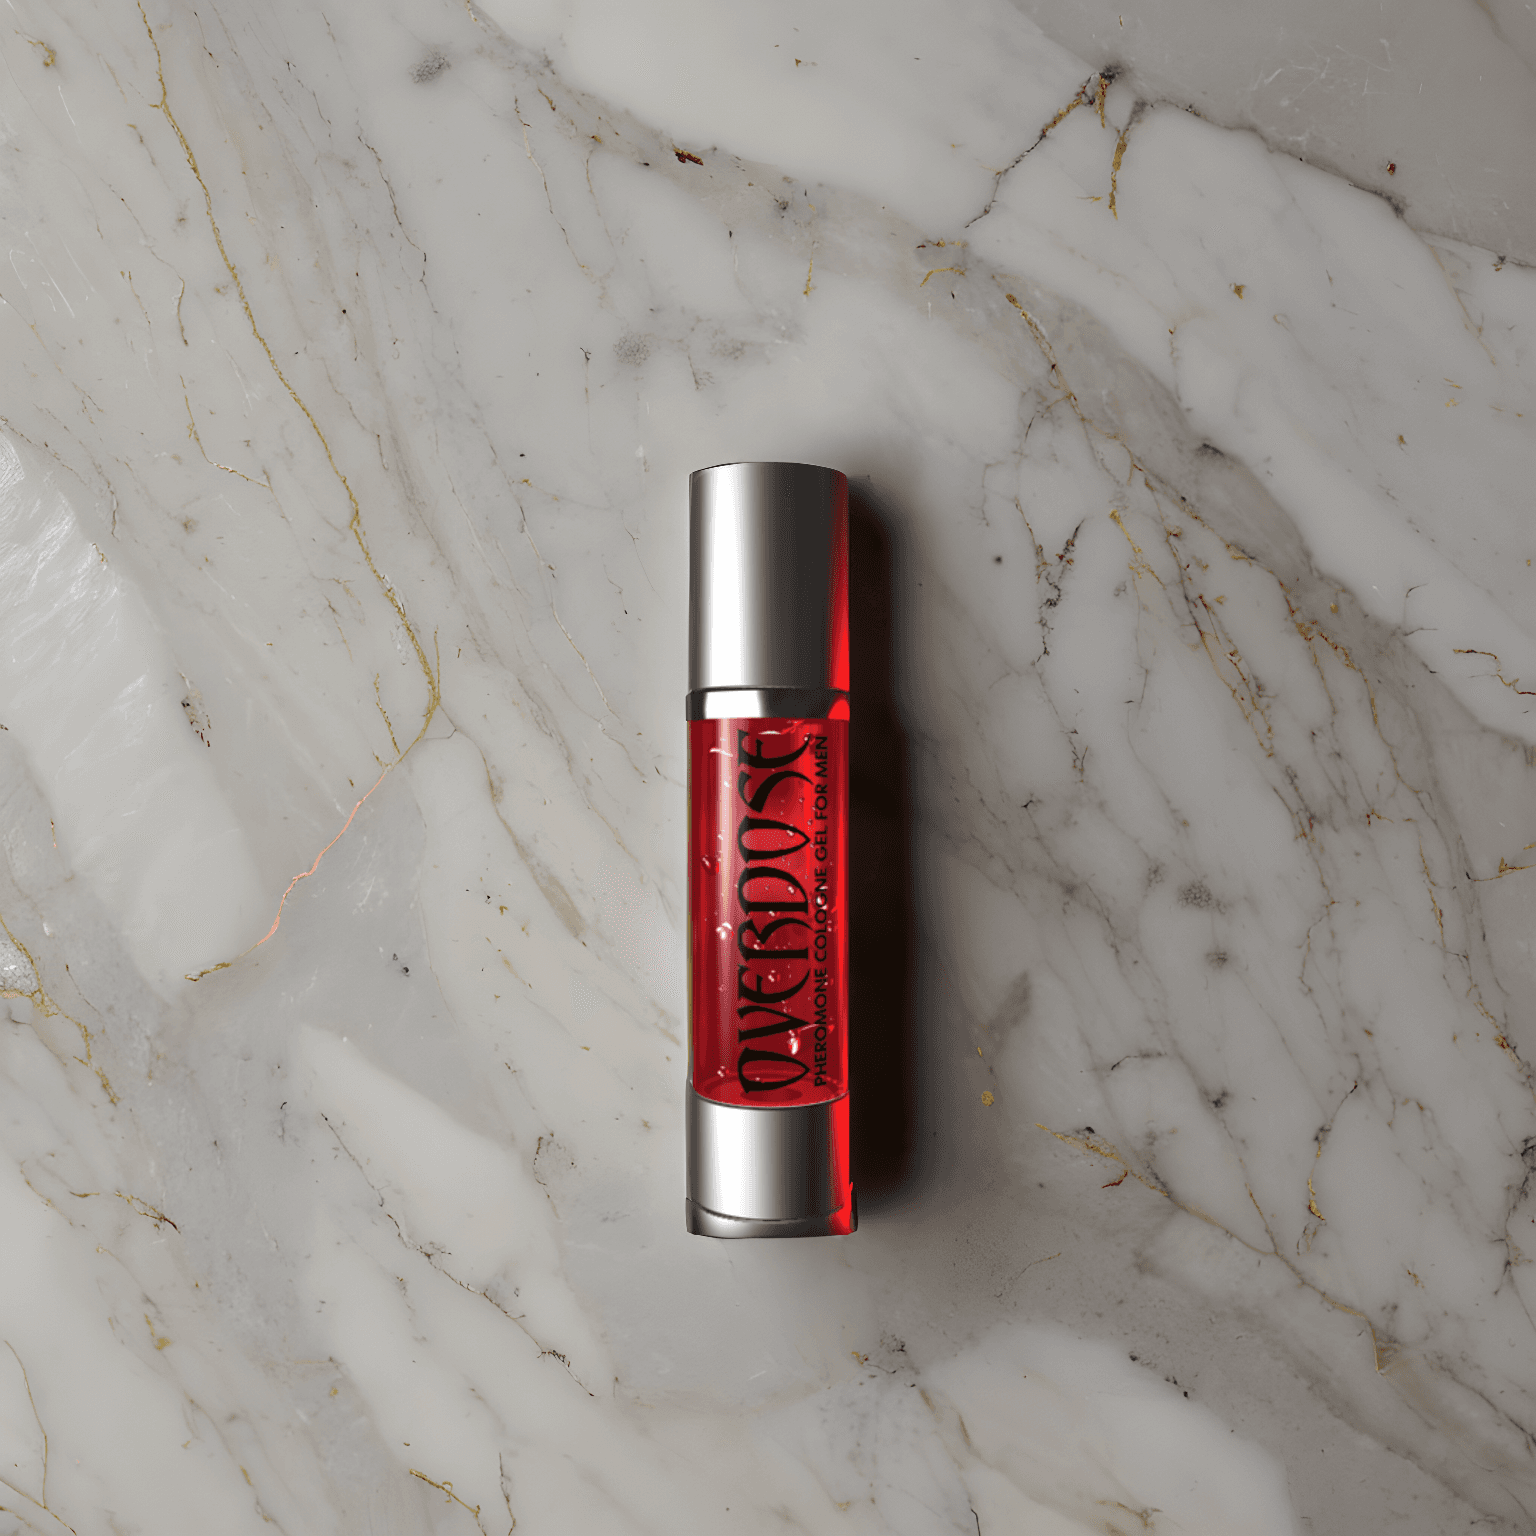 "Overdose Pheromone Gel for Men by Royal Pheromones in a sleek red and silver vacuum bottle, designed for controlled dispensing and prolonged pheromone release."